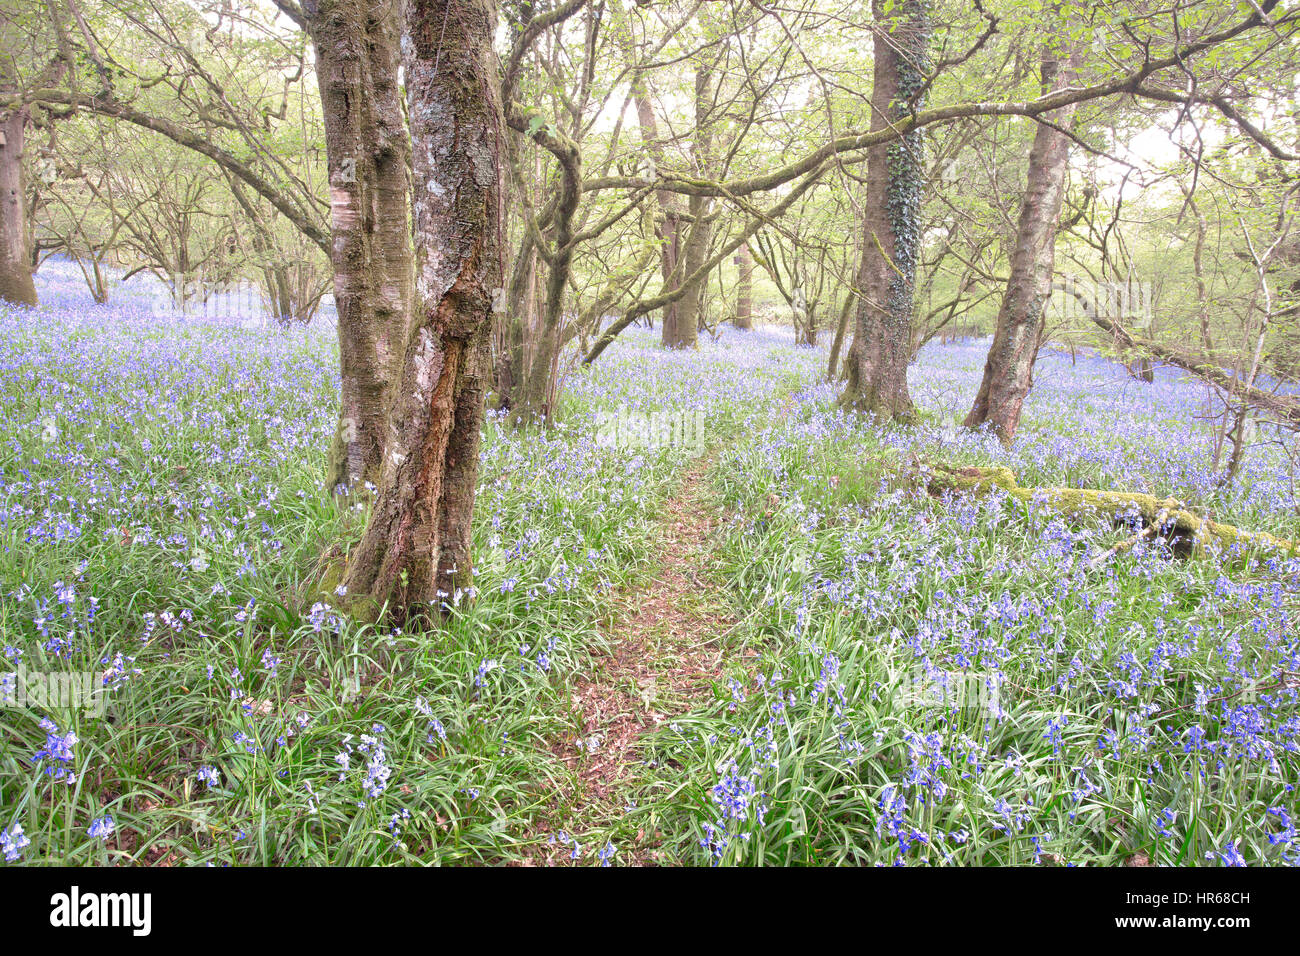 Bluebells in an English woodland in late spring/early summer Meldon Woods Devon Uk Stock Photo